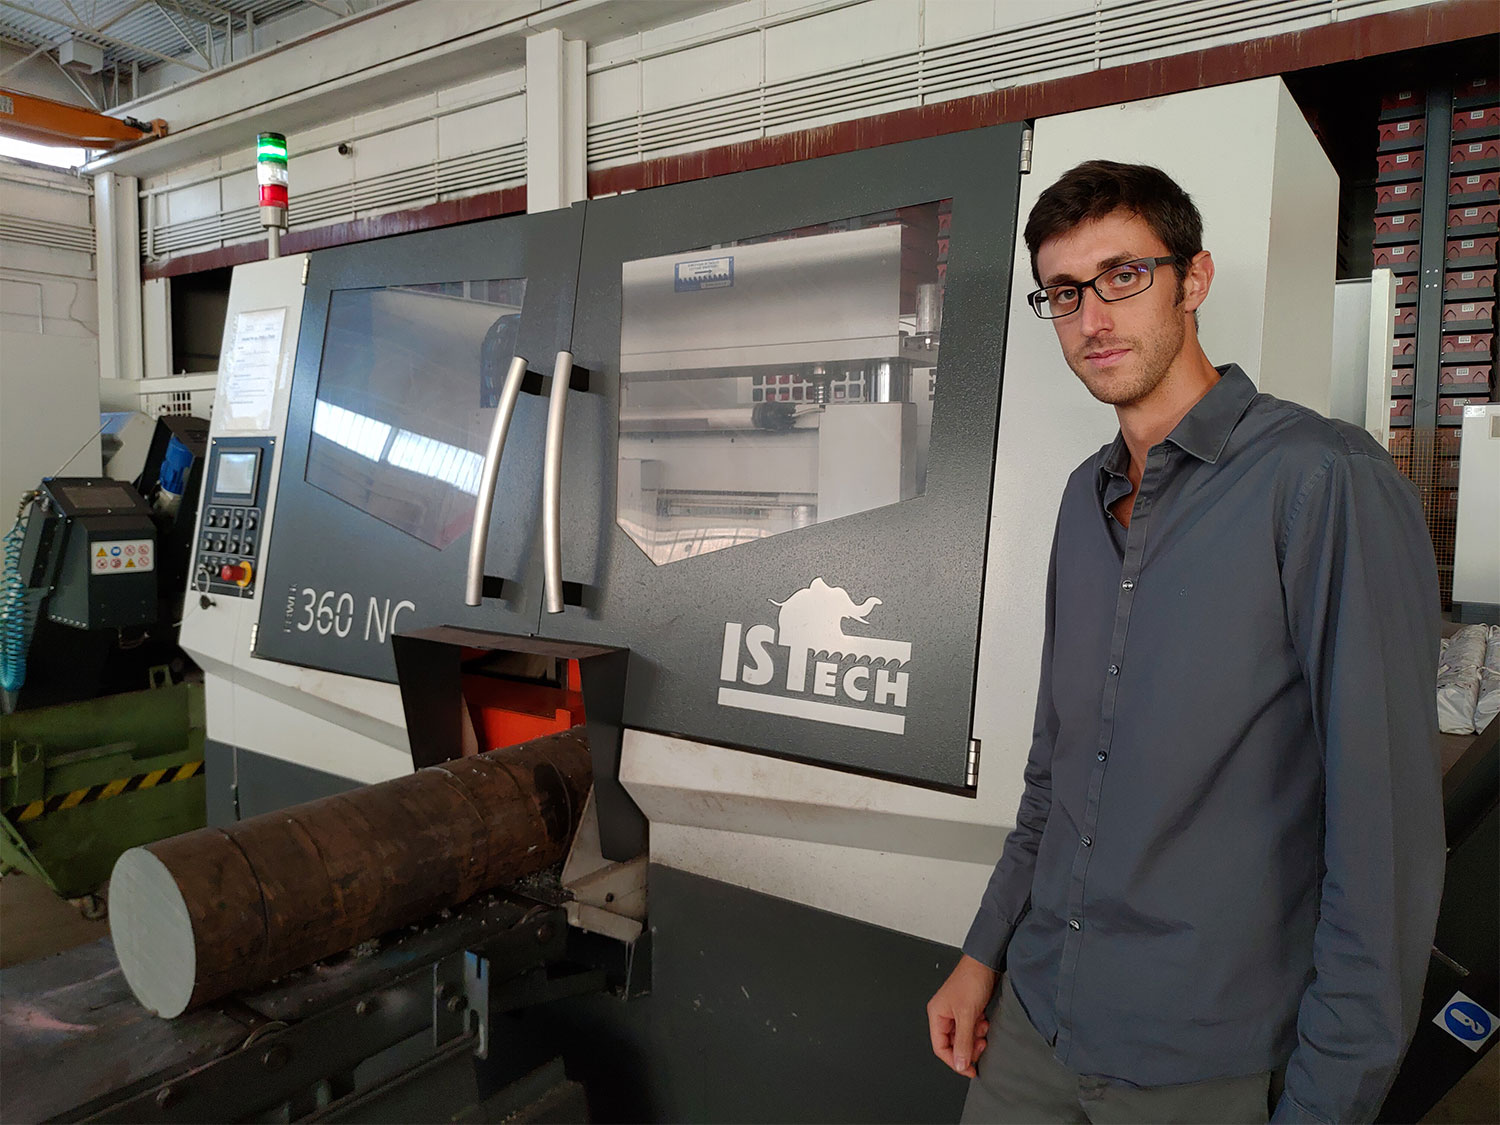 NUOVA BASSANI INCREASES ITS EFFICIENCY WITH ISTECH’S INNOVATIVE CUTTING SYSTEMS (Rivistacmi.it, September 25, 2019)